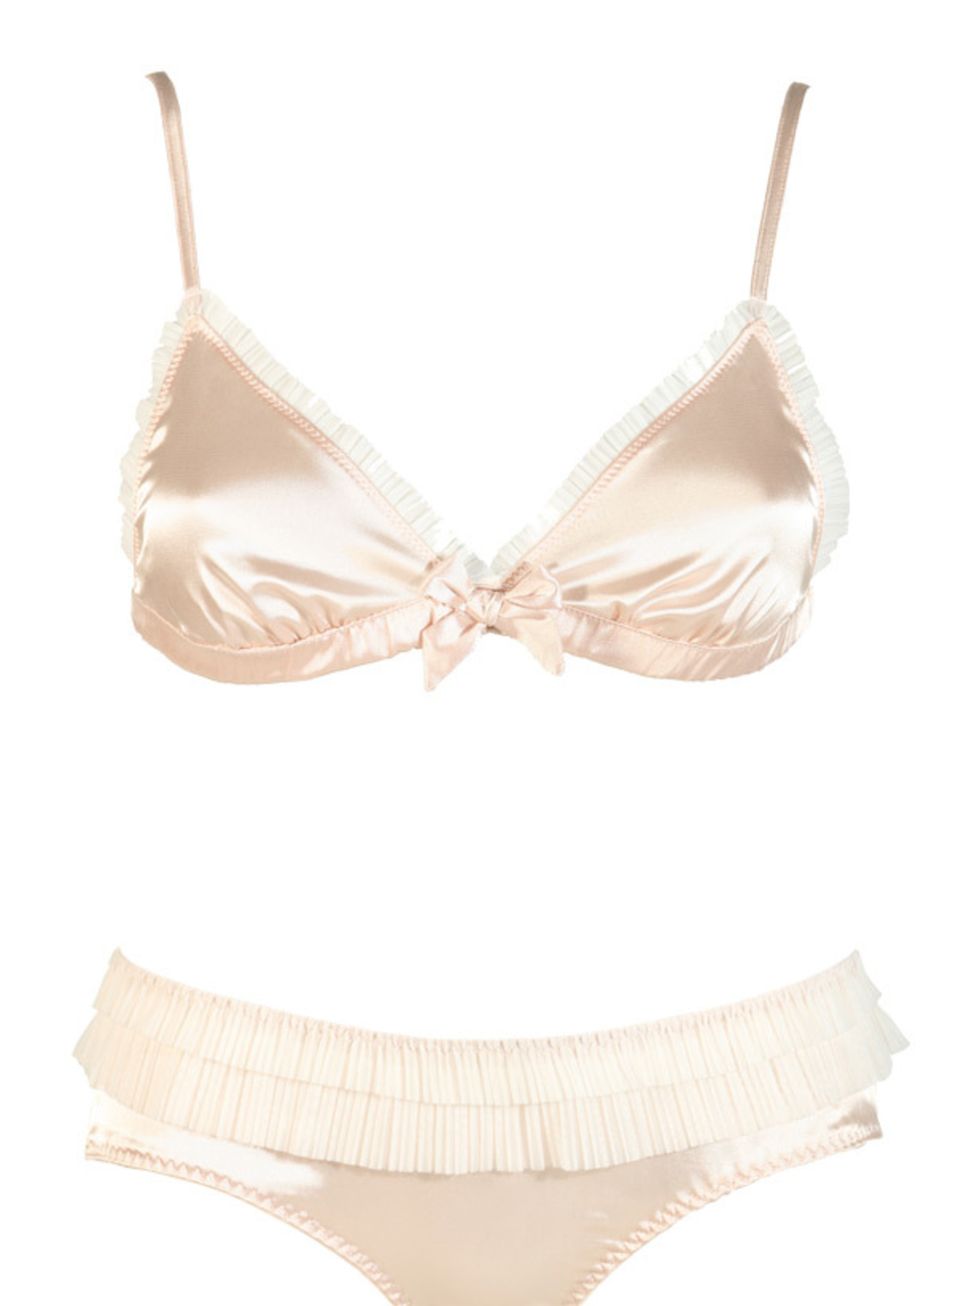 <p>Nude bow &amp; frill bra, £16, and pants, £10, by <a href="http://www.urbanoutfitters.co.uk/Bow-and-Frill-Satin-Triangle/invt/5741460924082&amp;bklist=icat,5,shop,womens,womensclothing,wunderwear">Urban Outfitters</a></p>